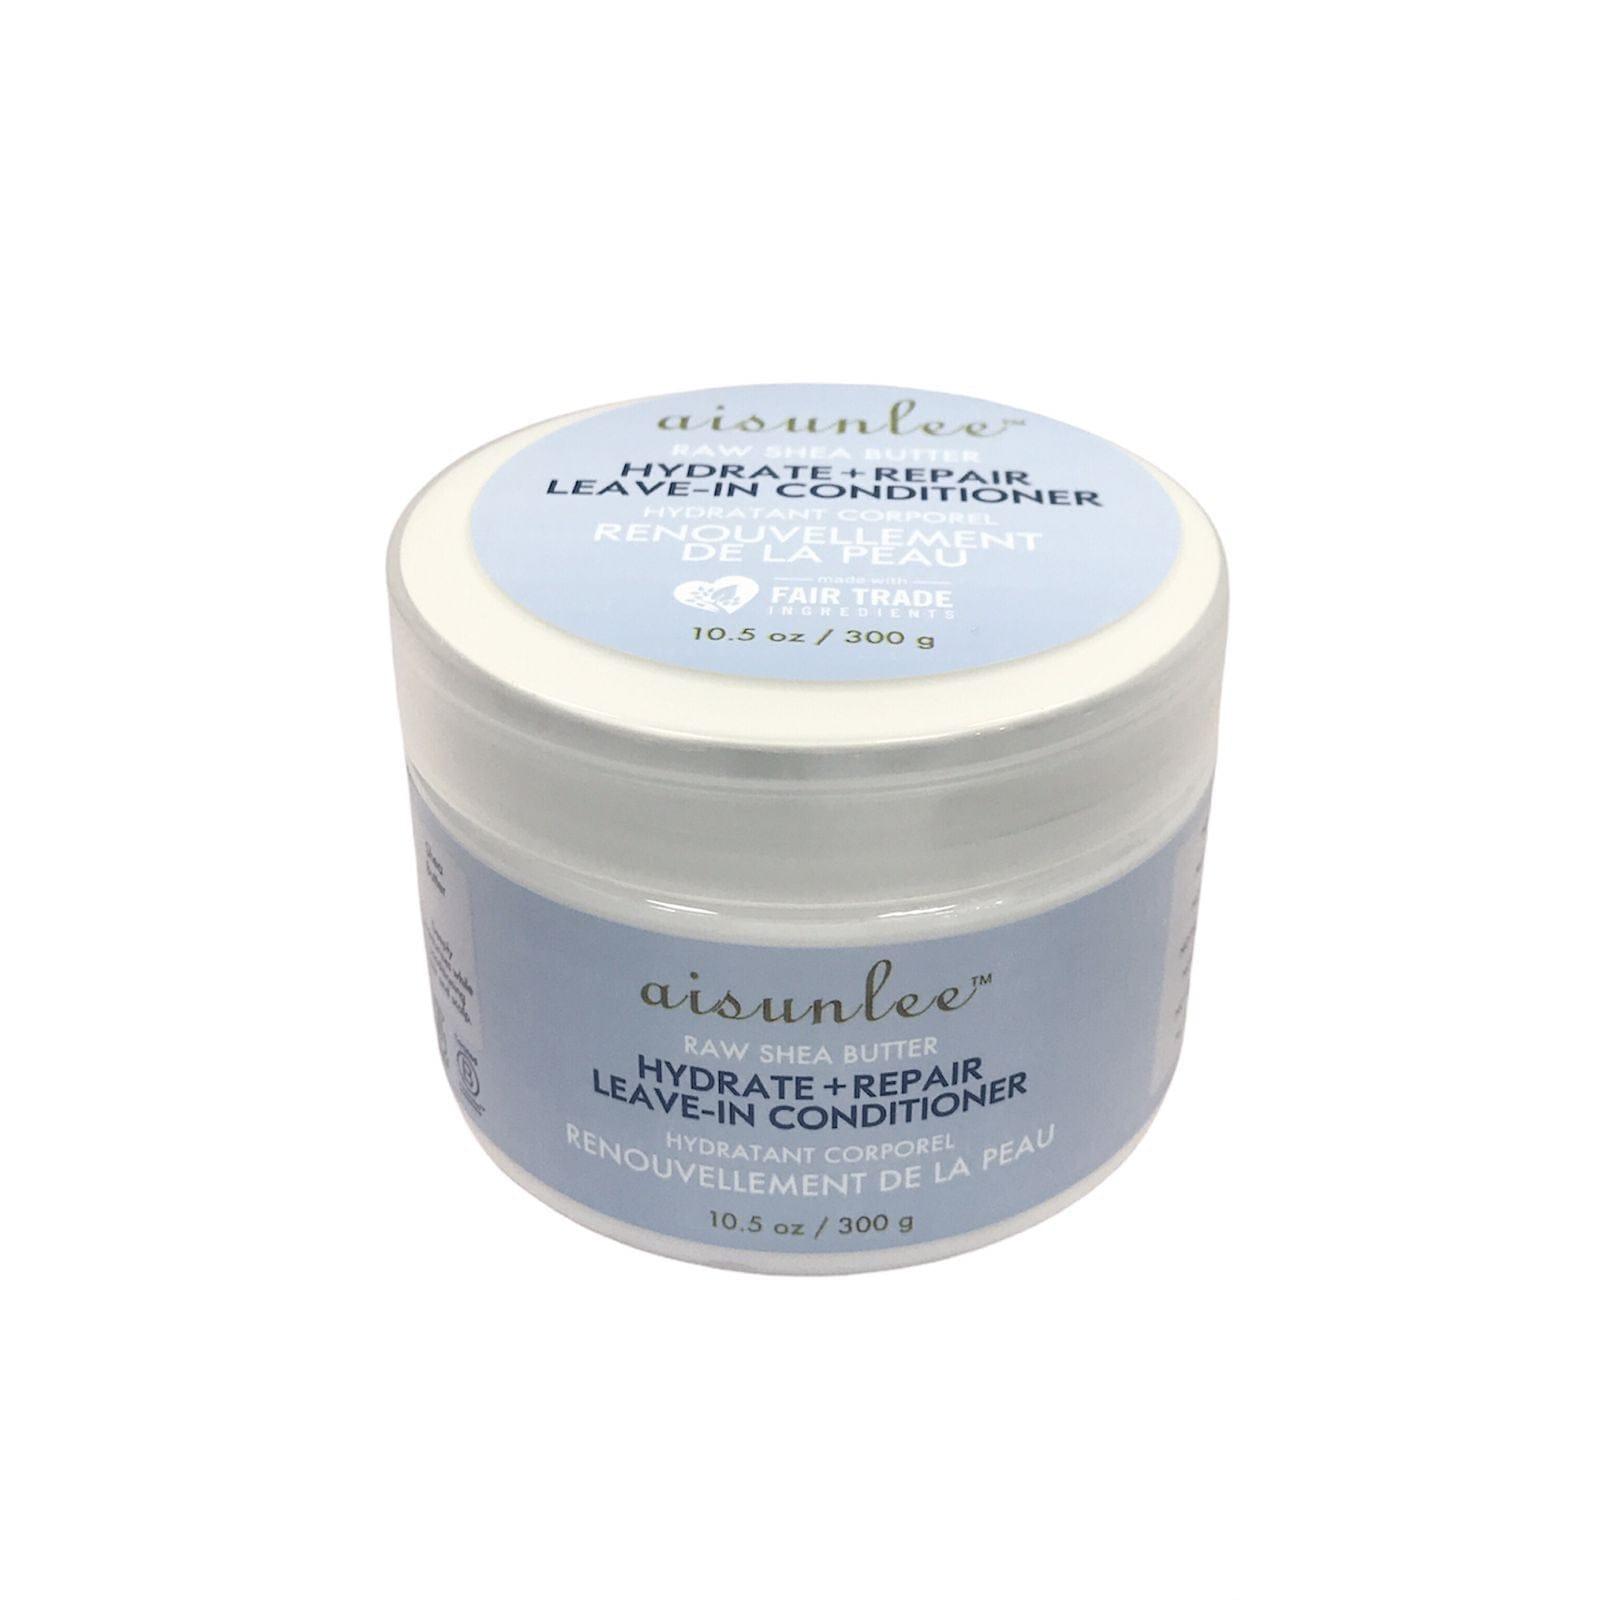 Aisunlee Raw Shea Butter Hydrate & Repair Leave-in Conditioner 300g